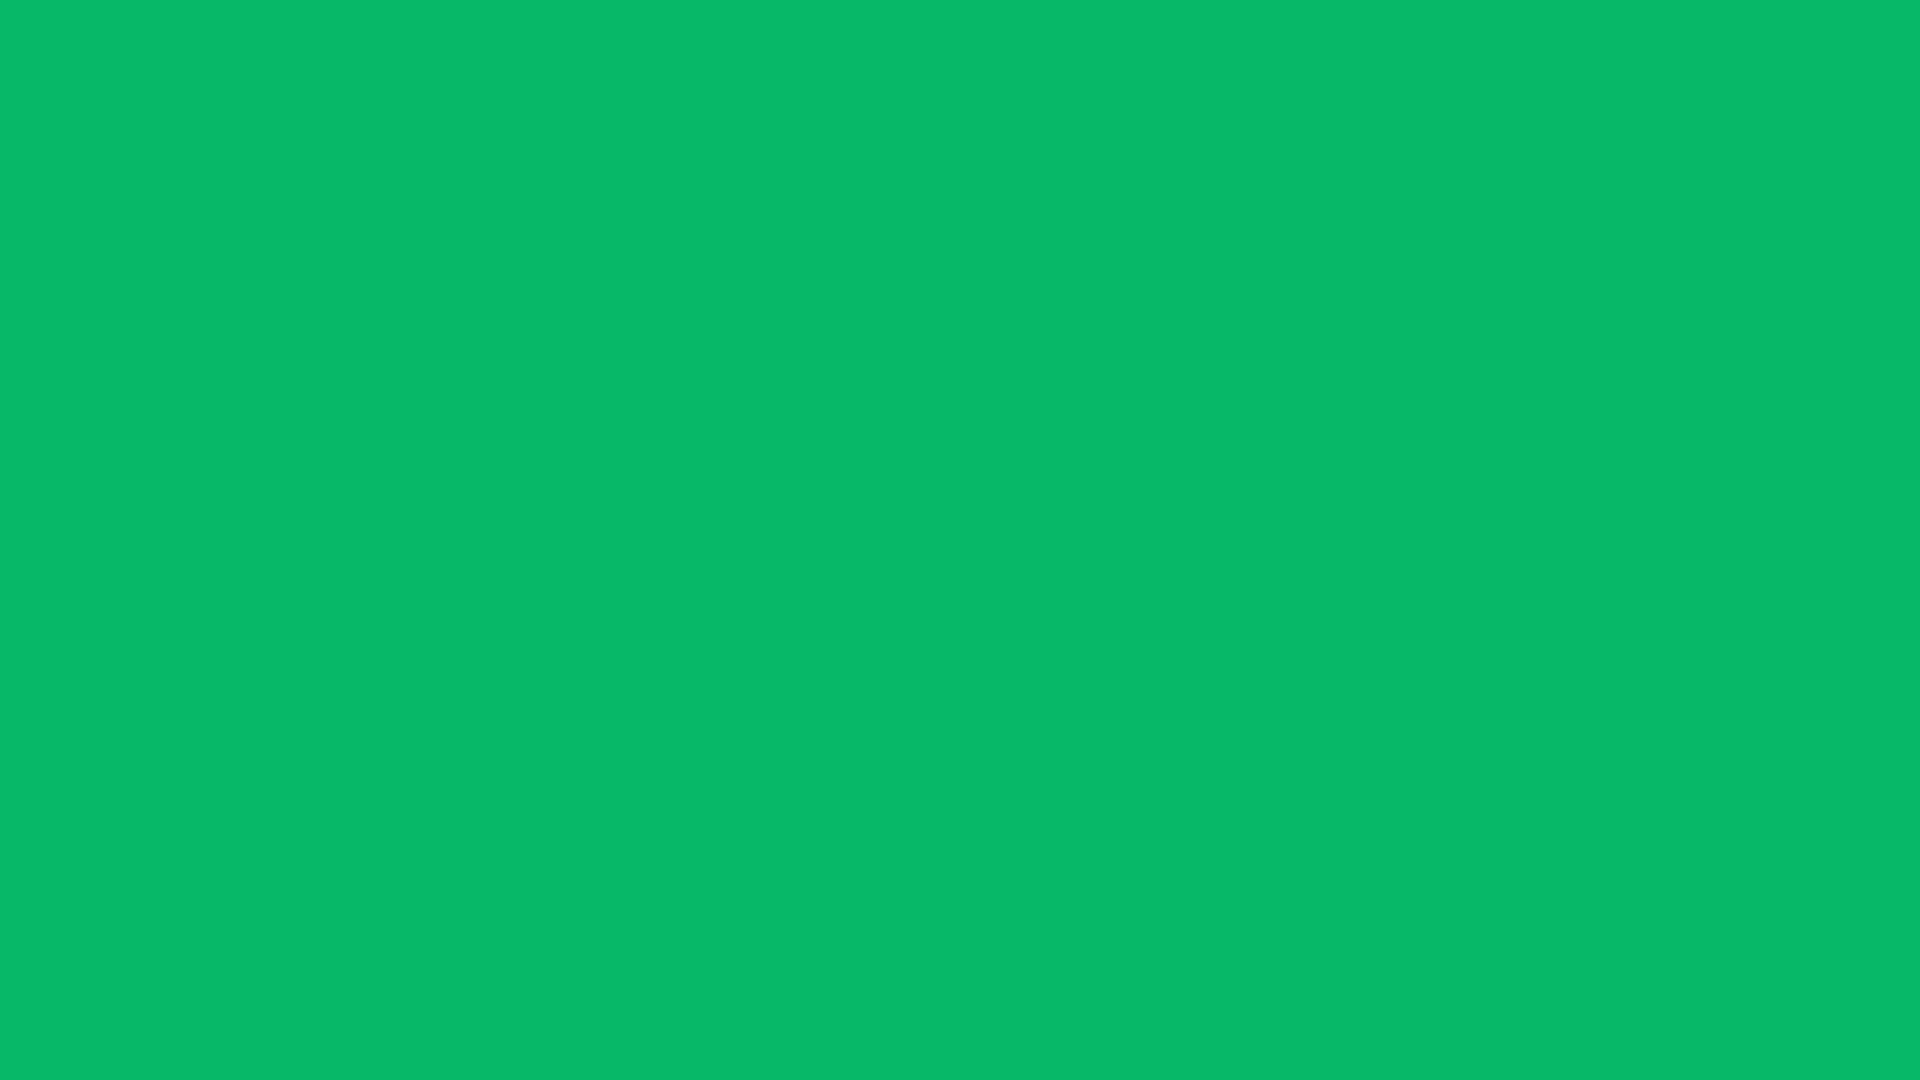 Green Teal Solid Color Background